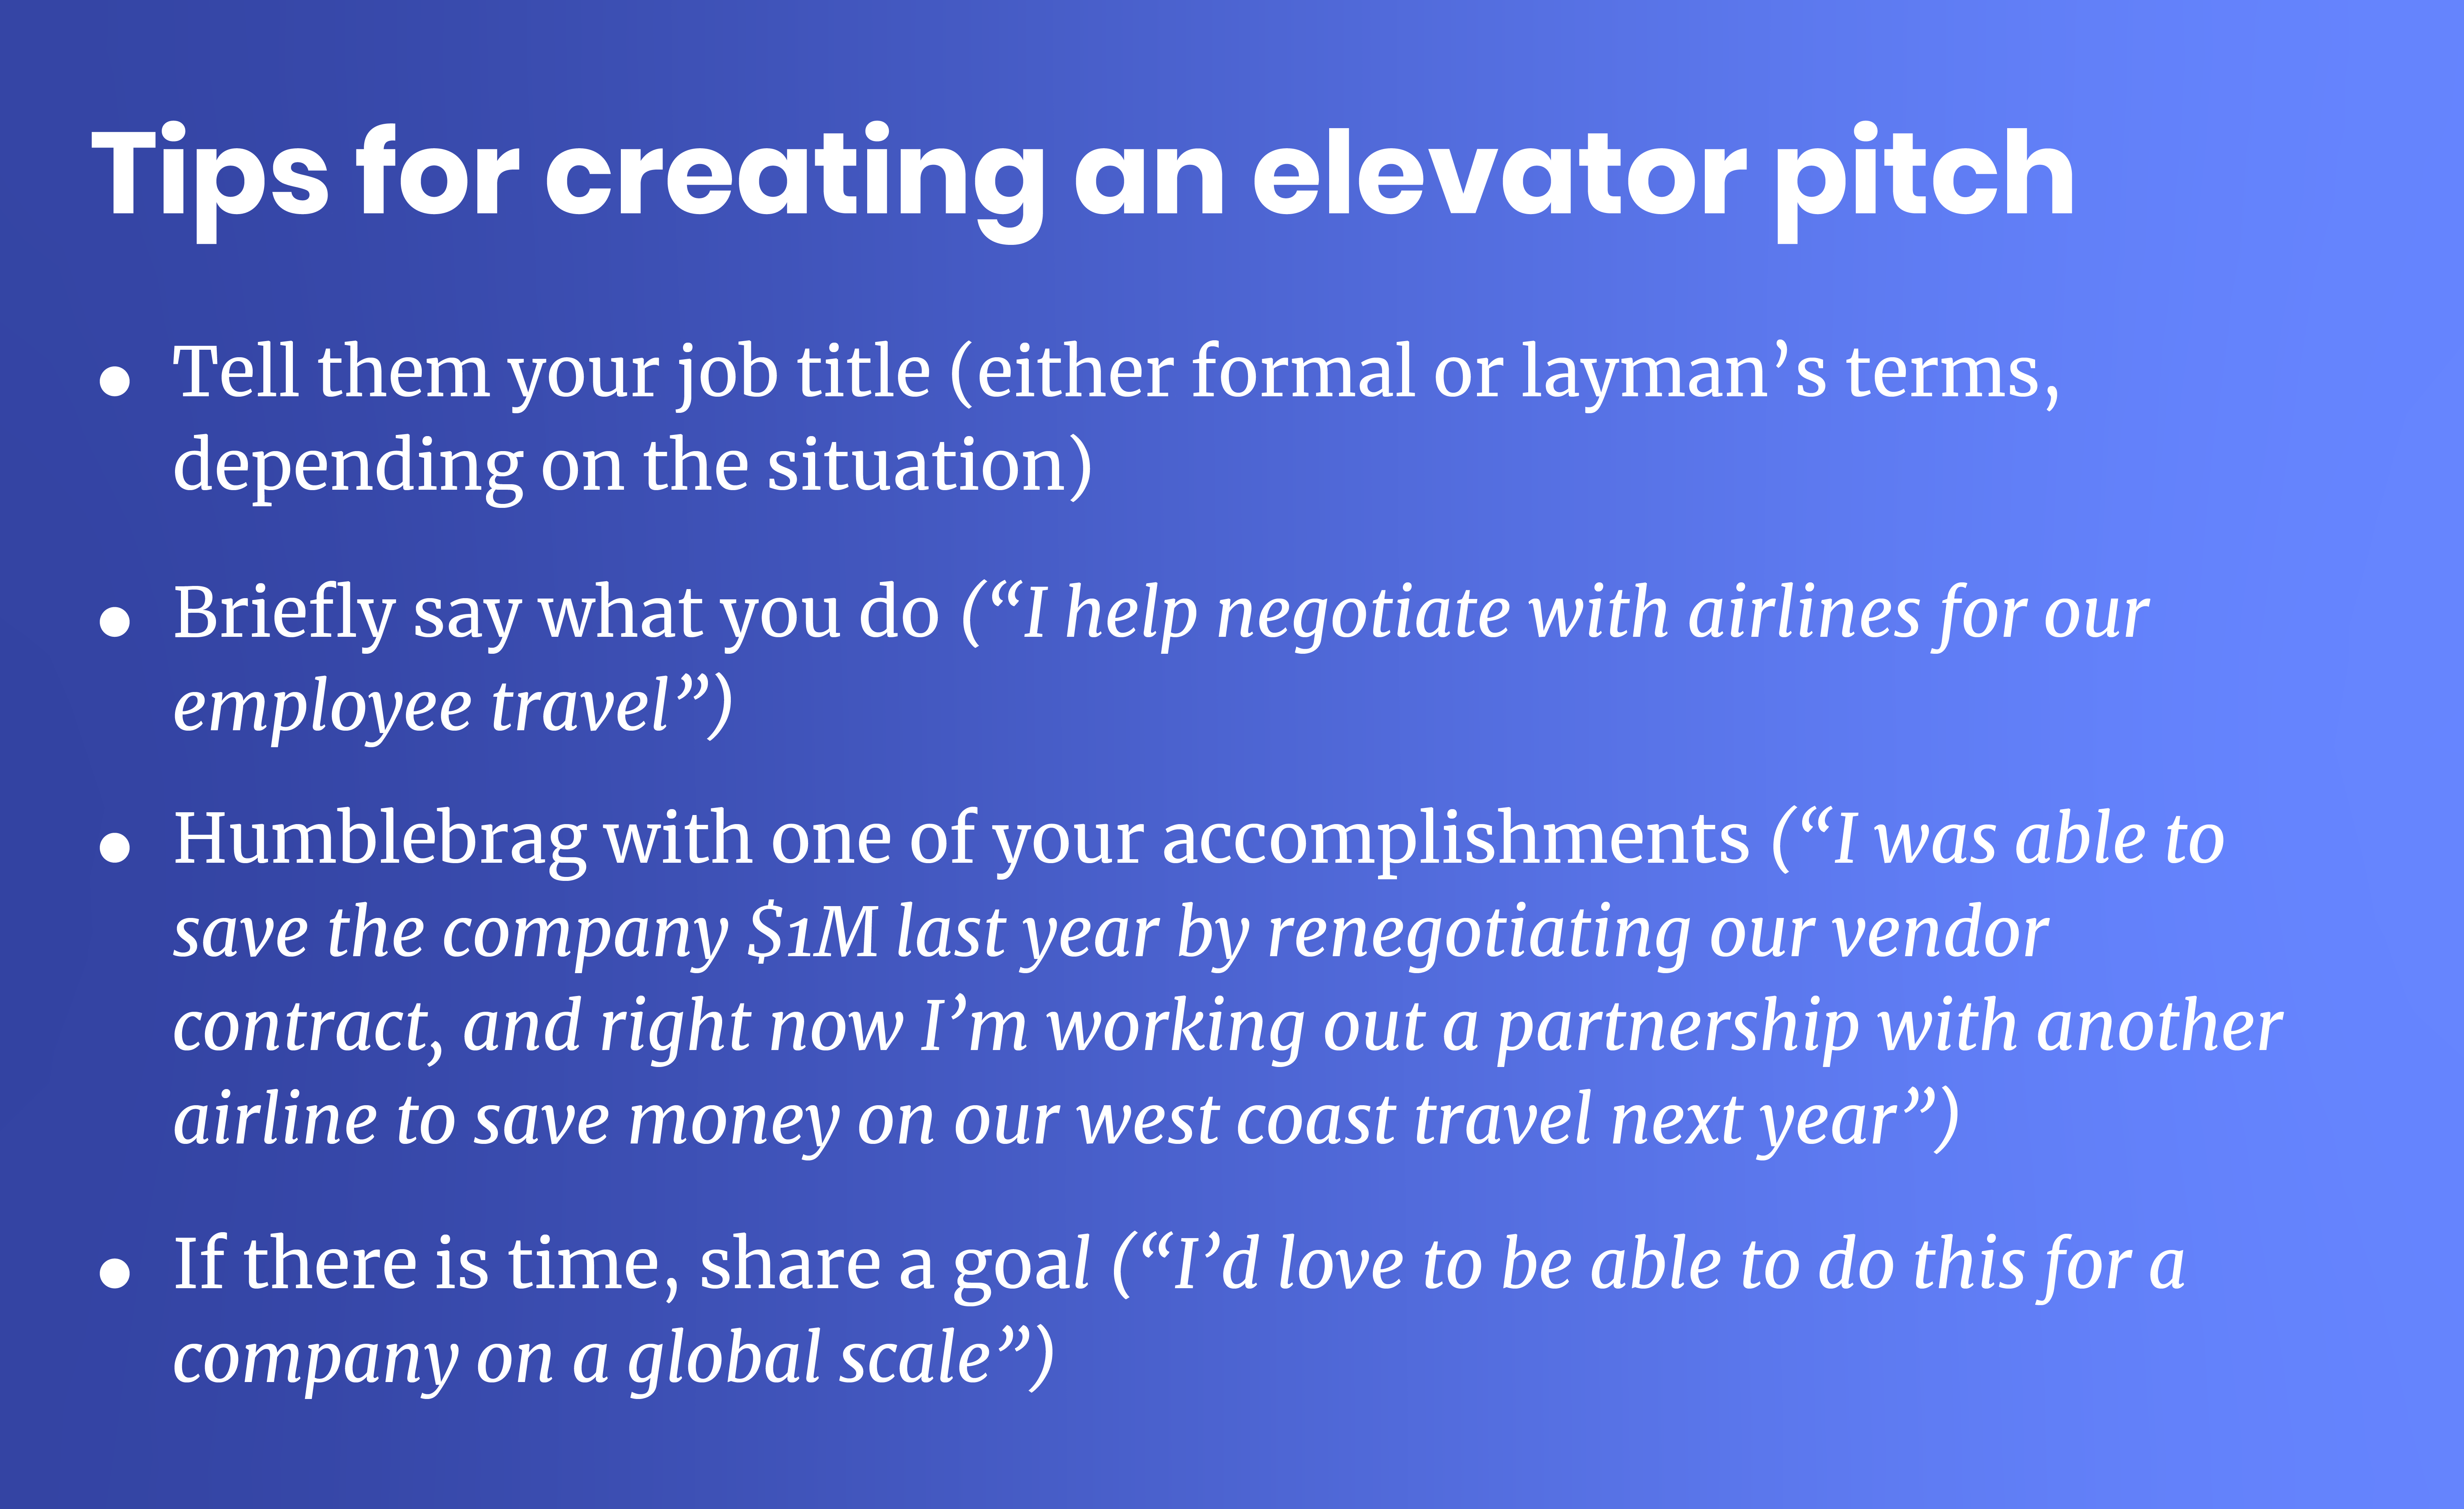 tips to creating an elevator pitch